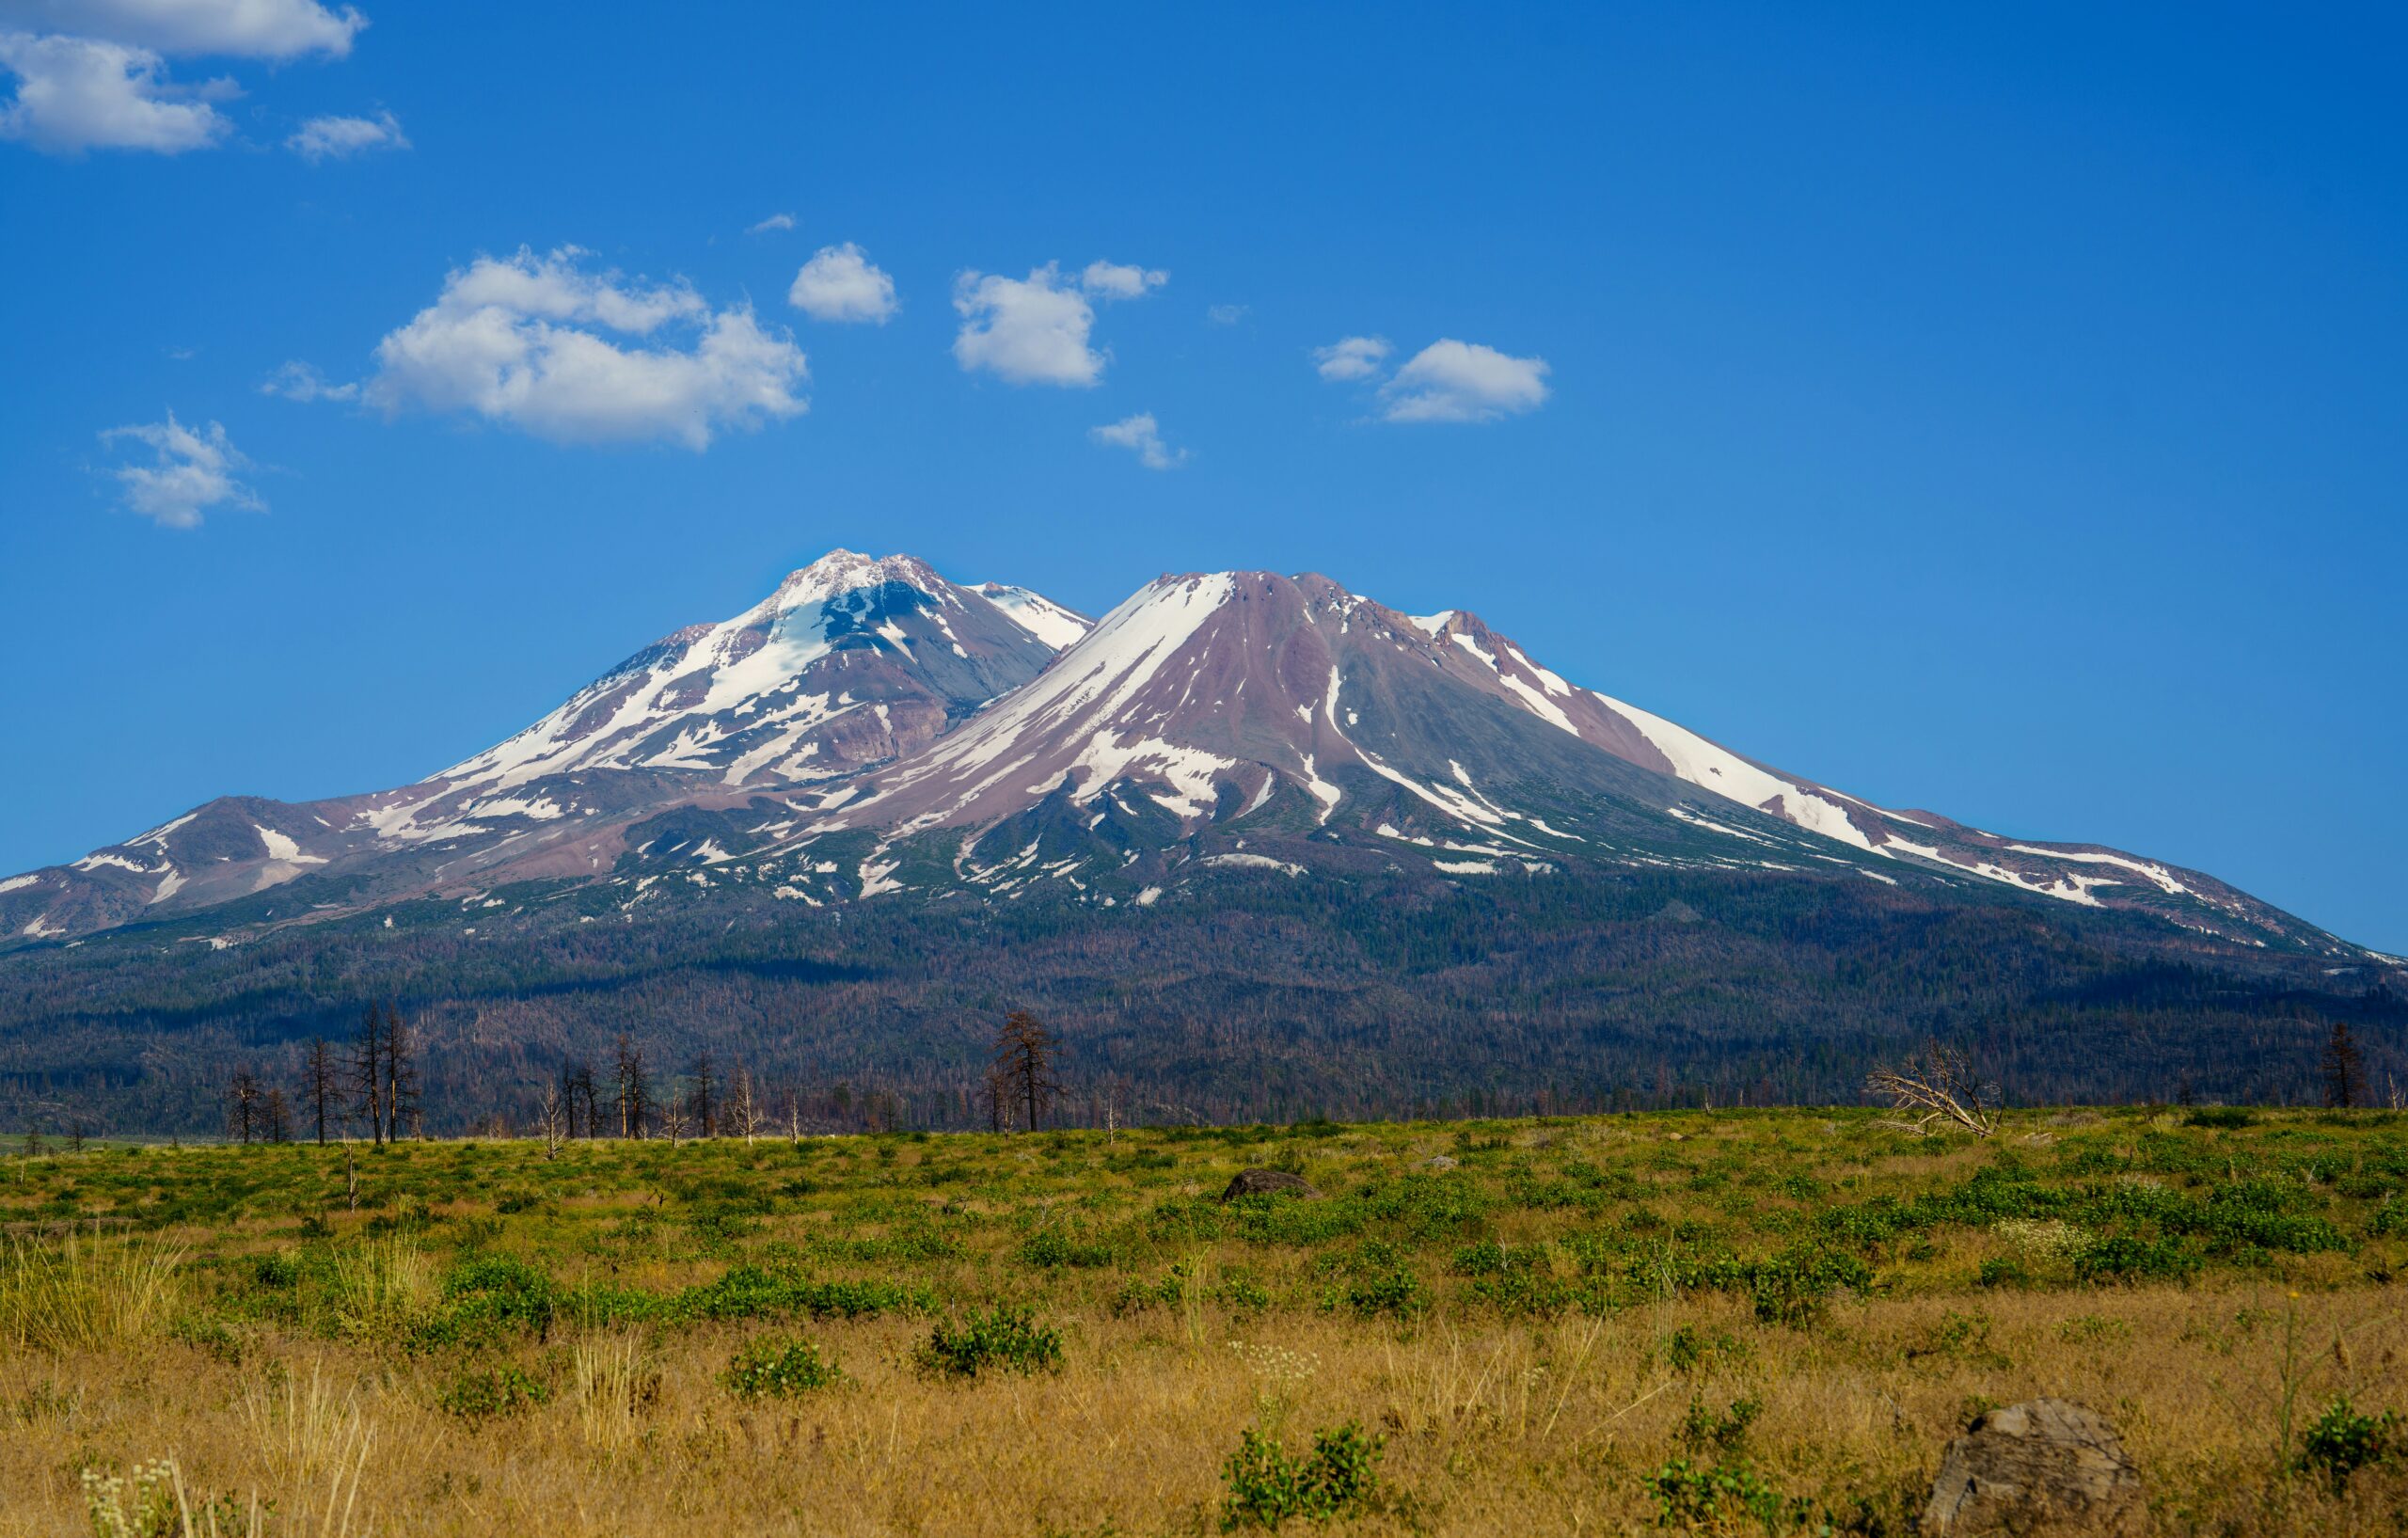 Are There Any Physical Fitness Requirements For Climbing Mount Shasta?